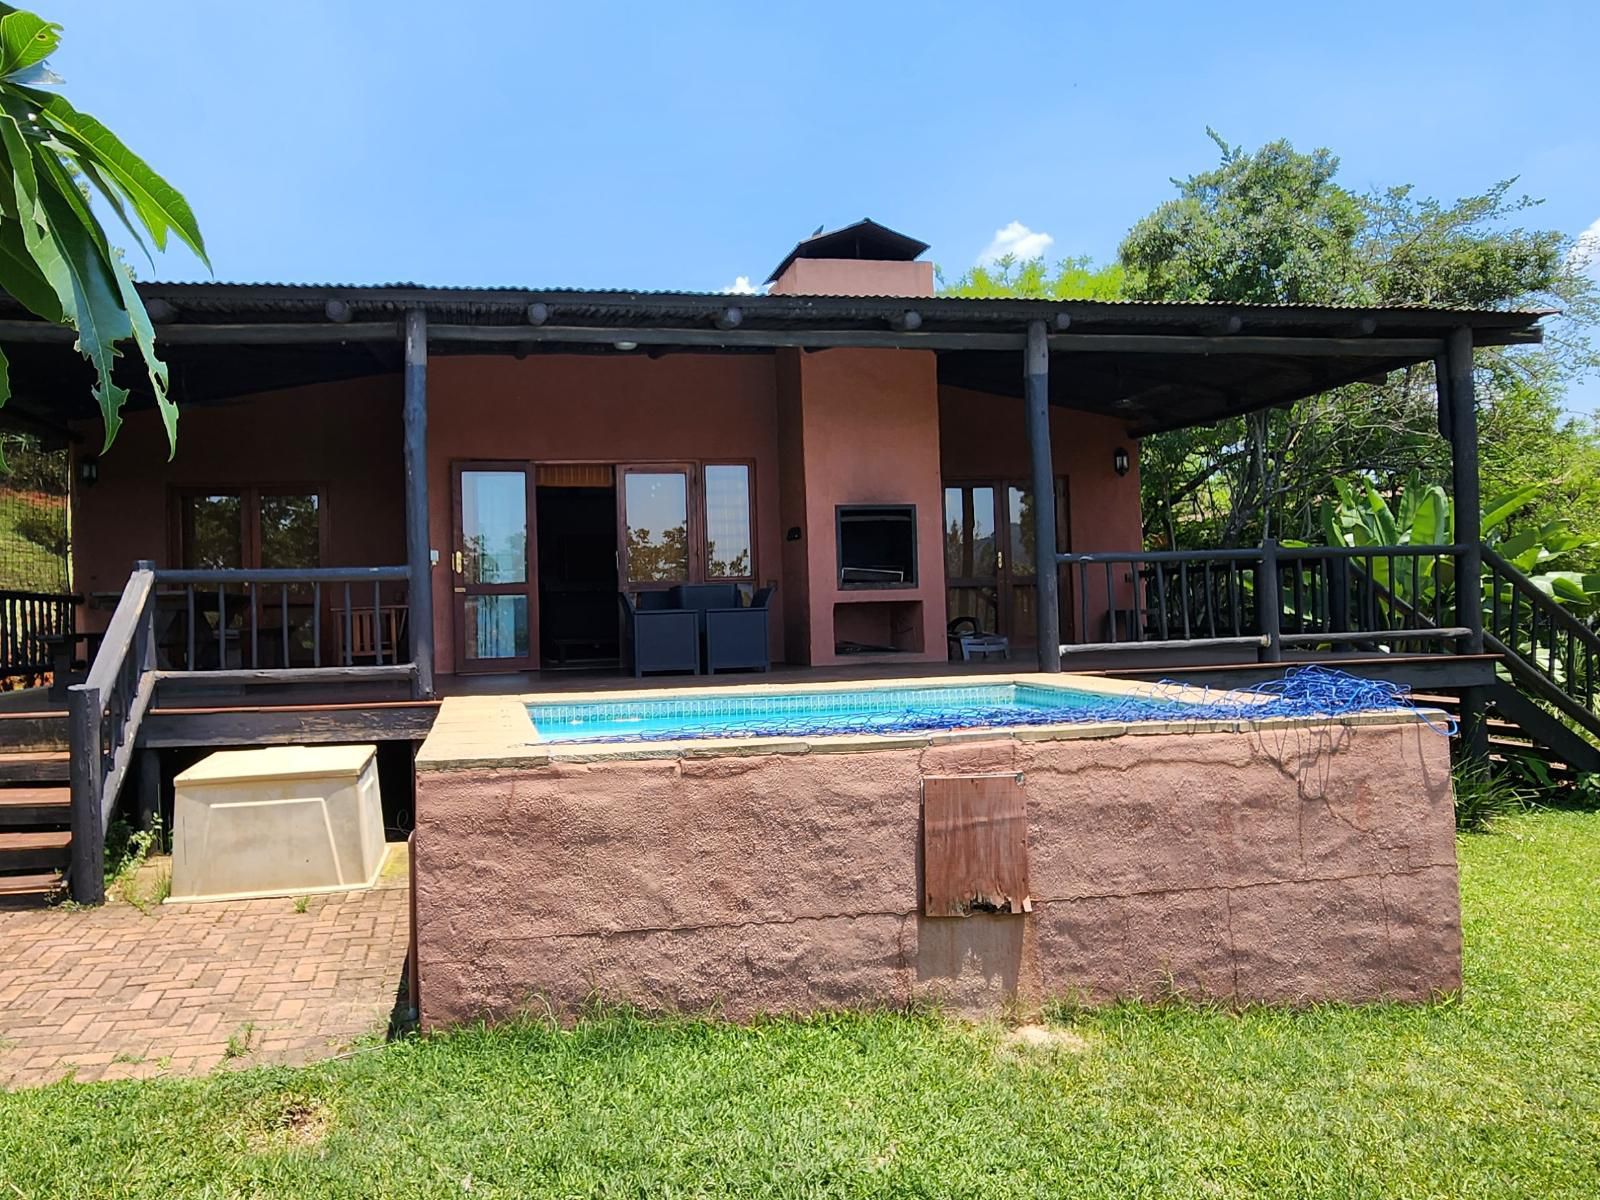 Dagama Lake Cottages Hazyview Mpumalanga South Africa Complementary Colors, House, Building, Architecture, Swimming Pool